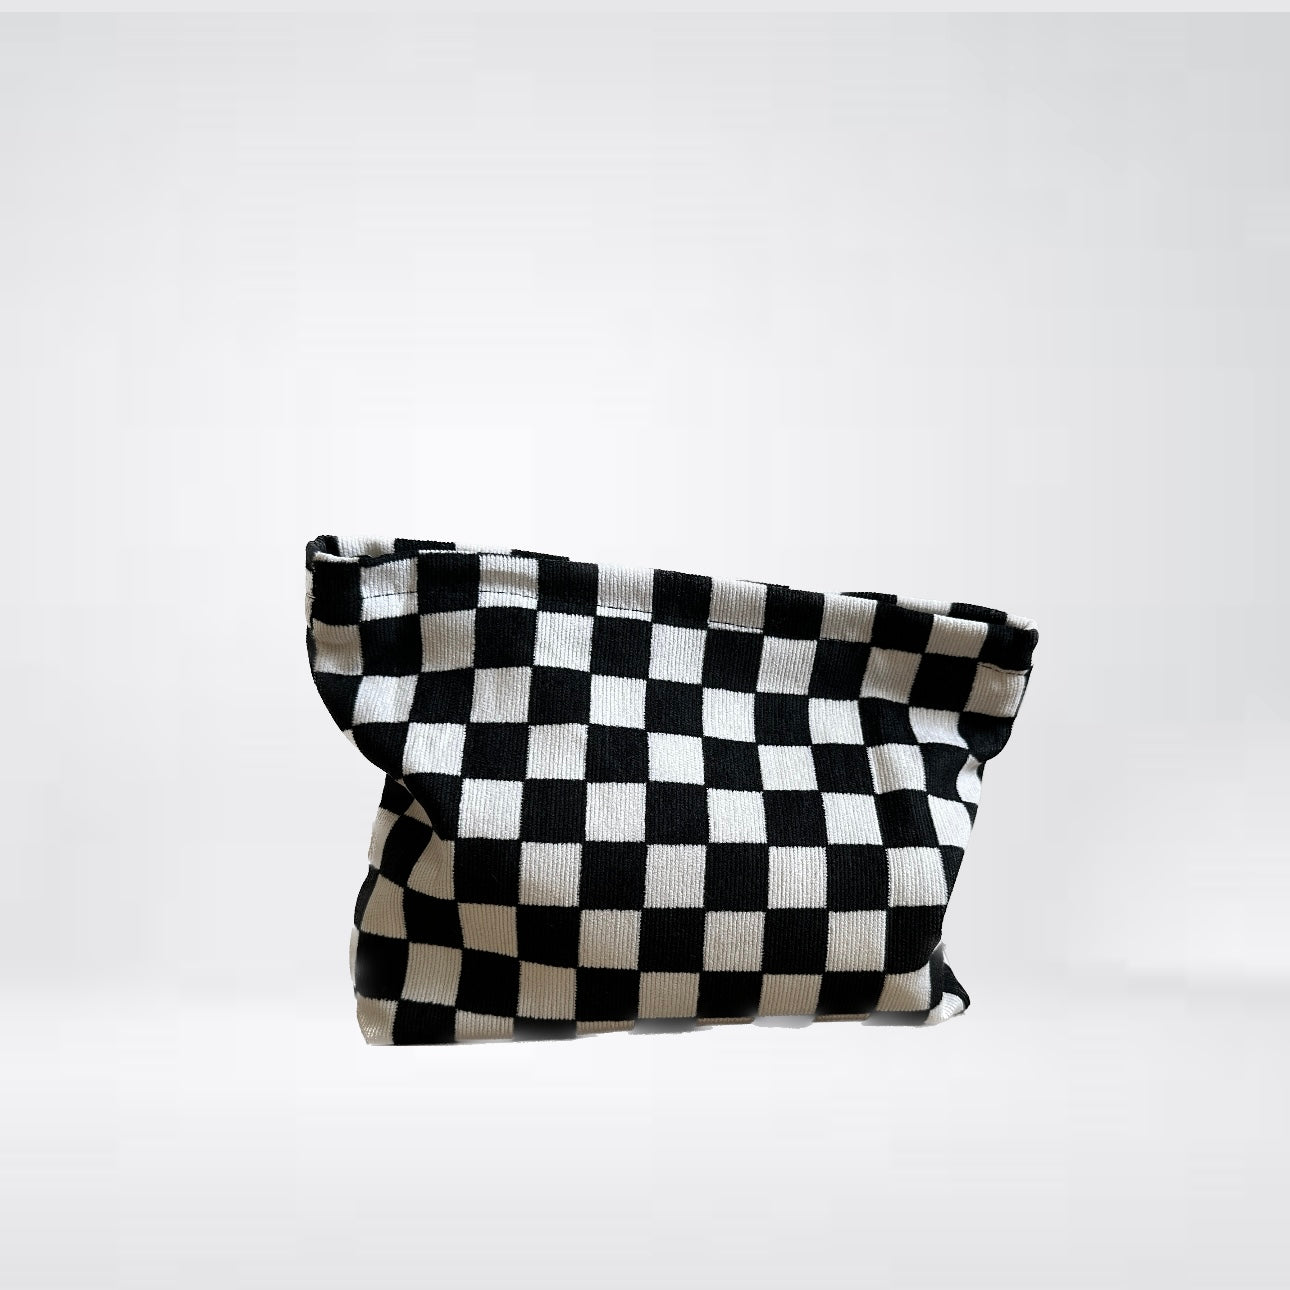 Clutch bag cosmetic bag "Checker" with checked pattern made of fine cord in black and white